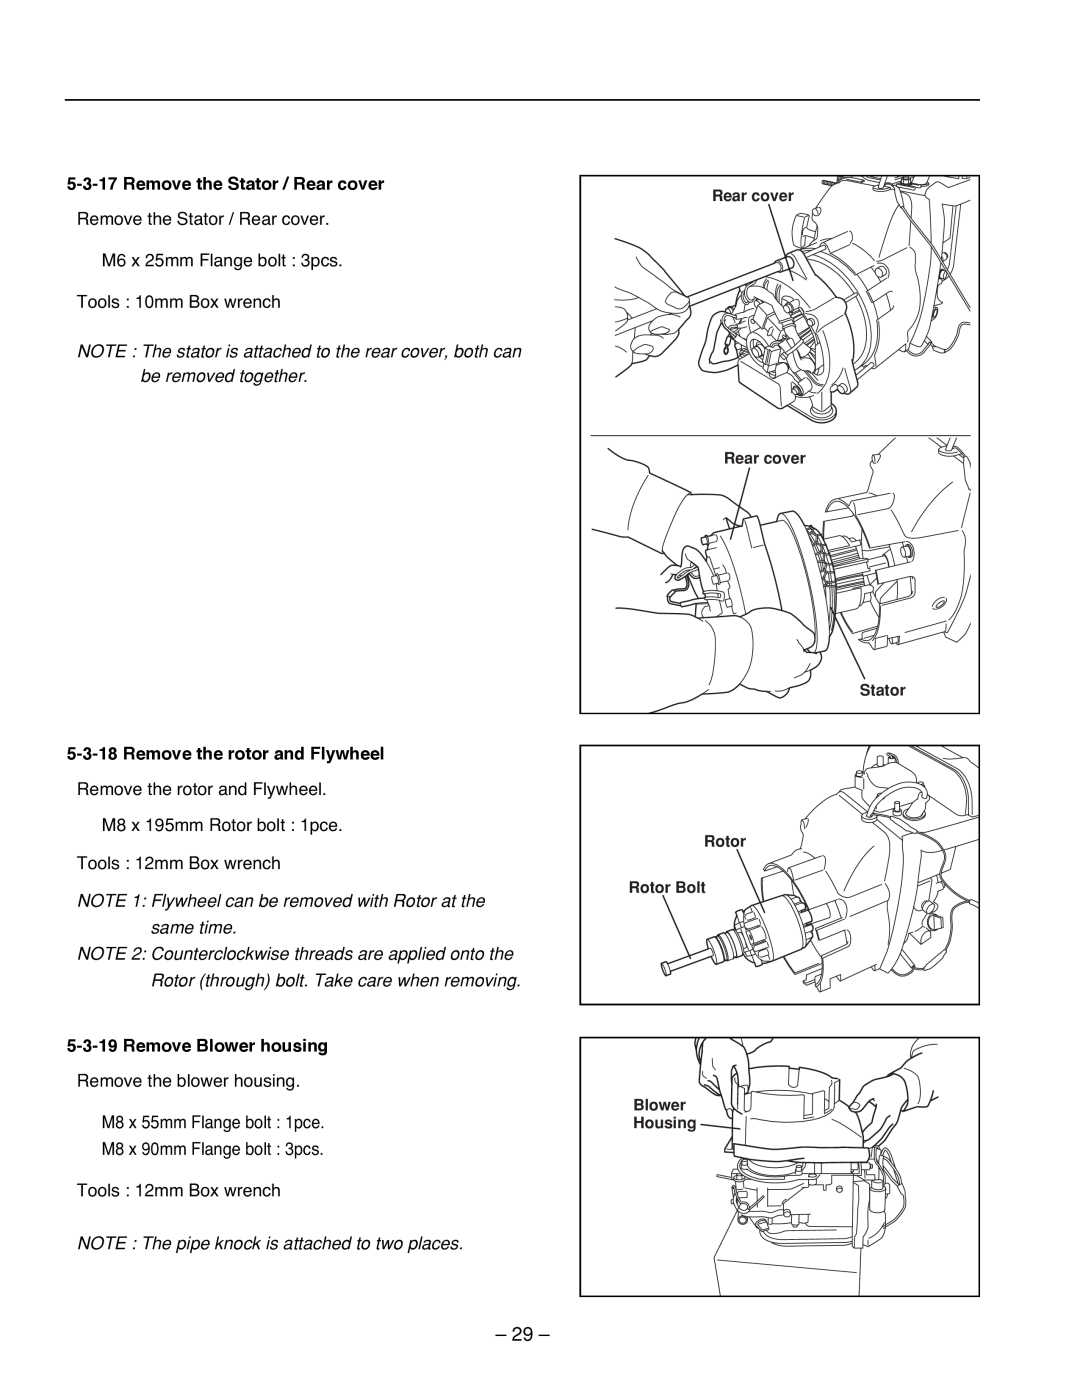 Subaru R1100 service manual Remove the Stator / Rear cover, Remove the rotor and Flywheel, Remove Blower housing 